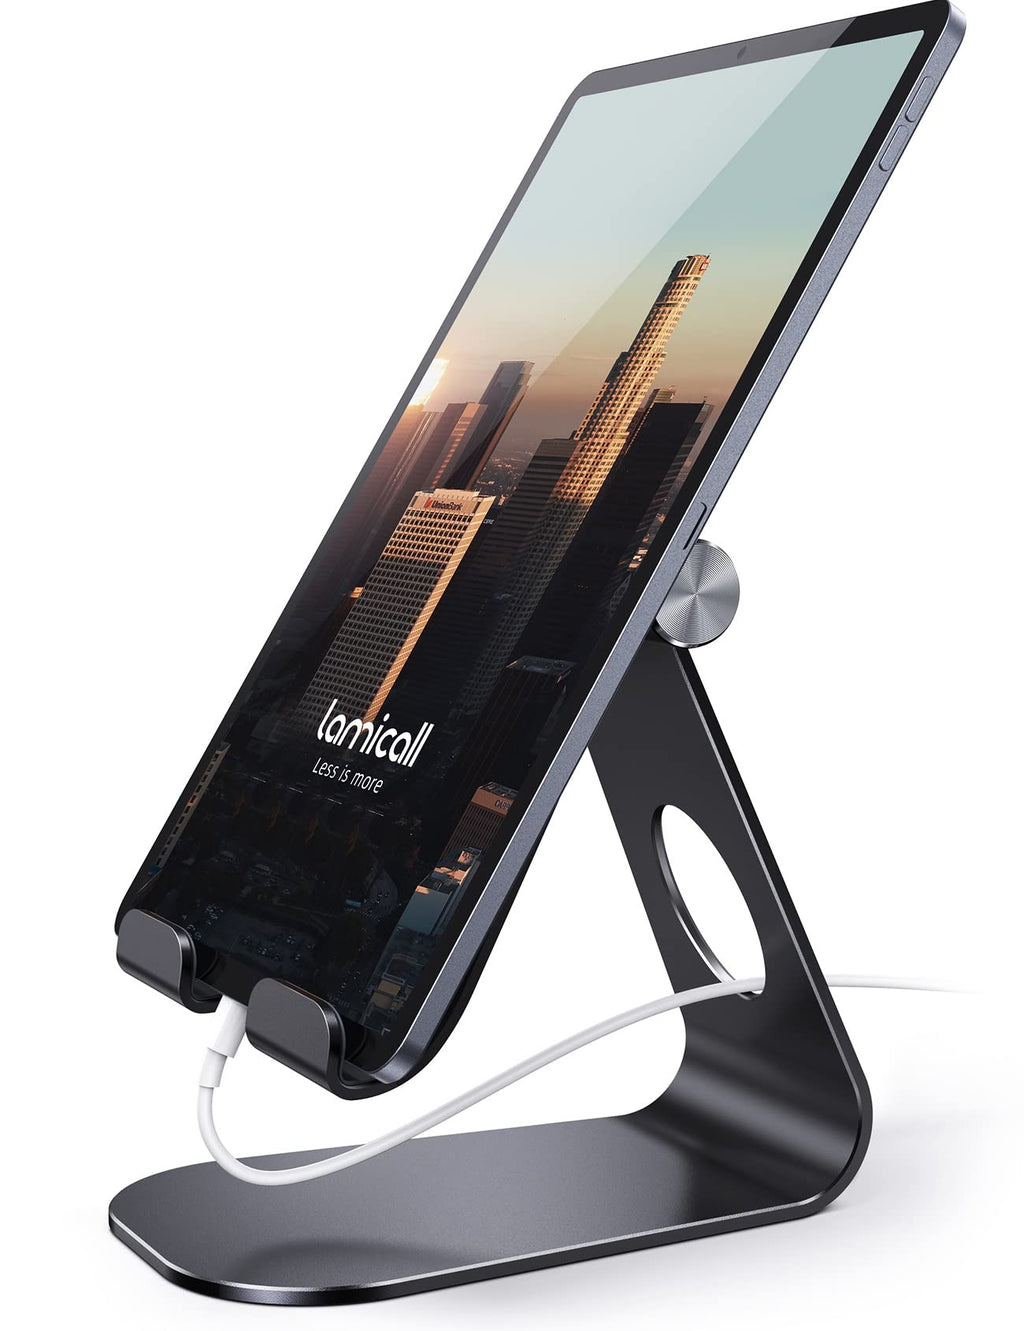  [AUSTRALIA] - Tablet Stand Adjustable, Lamicall Tablet Stand : Desktop Stand Holder Dock Compatible with Tablet Such as iPad 2018 Pro 9.7, 10.5, Air Mini 2 3 4, Kindle, Nexus, Accessories, E-Reader (4-13'')-Black Black